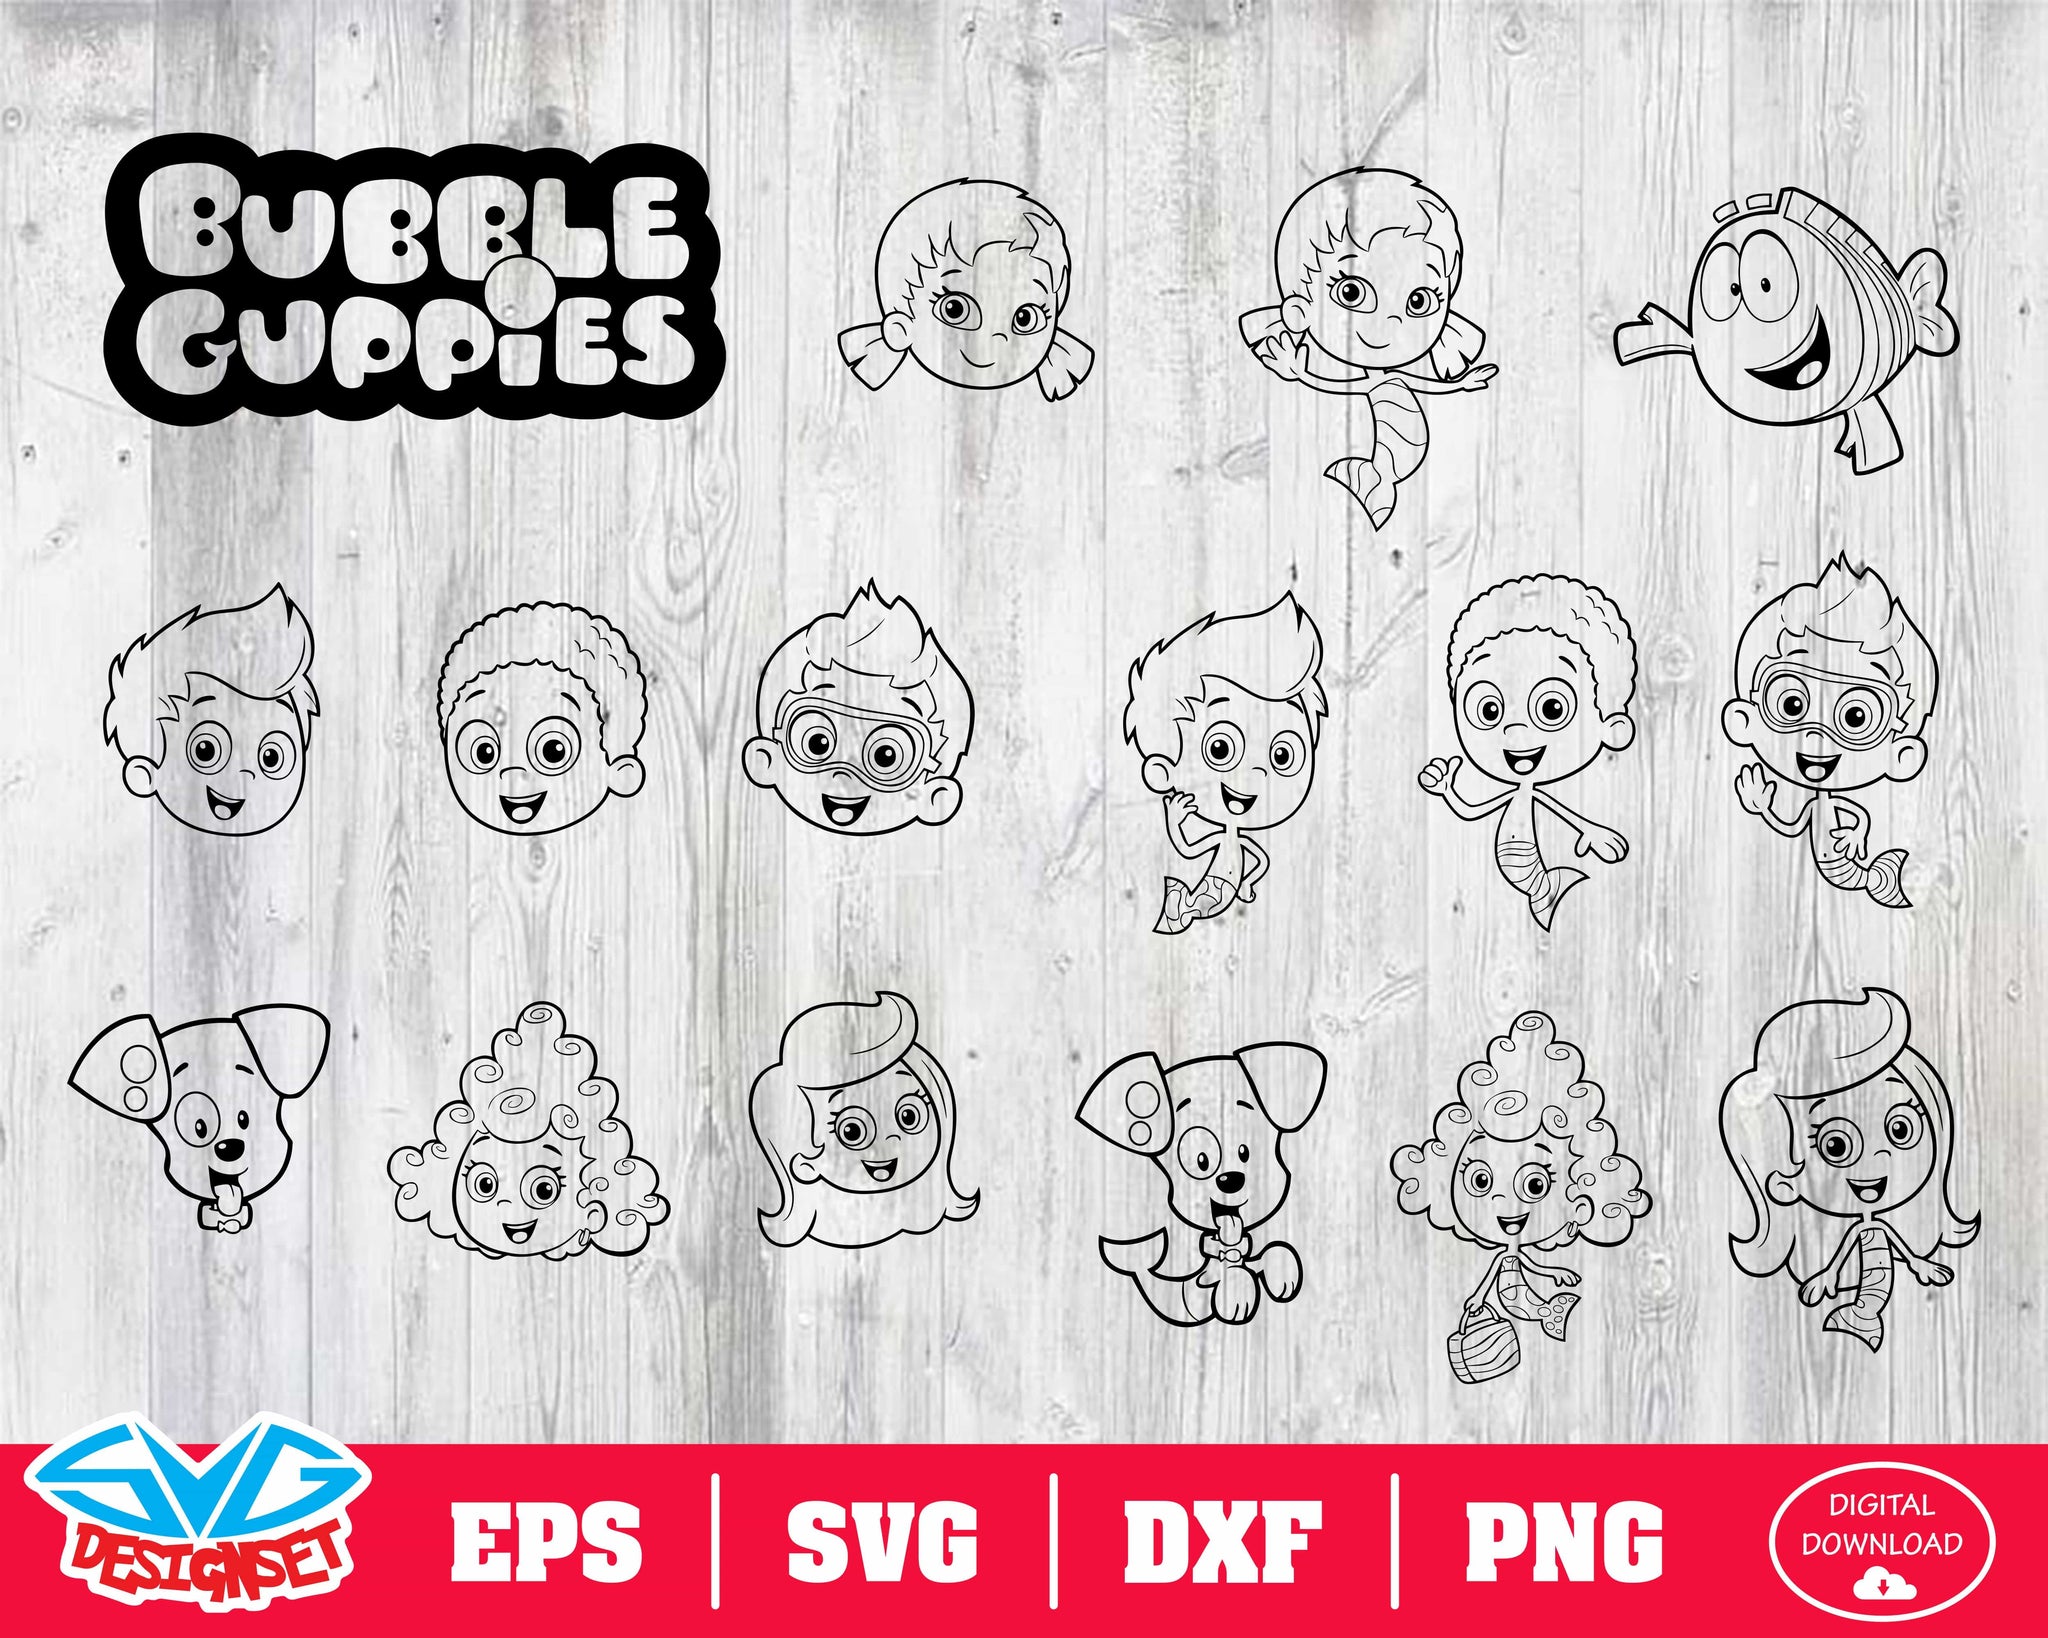 Bubble Guppies Svg, Dxf, Eps, Png, Clipart, Silhouette and Cutfiles #2 - SVGDesignSets